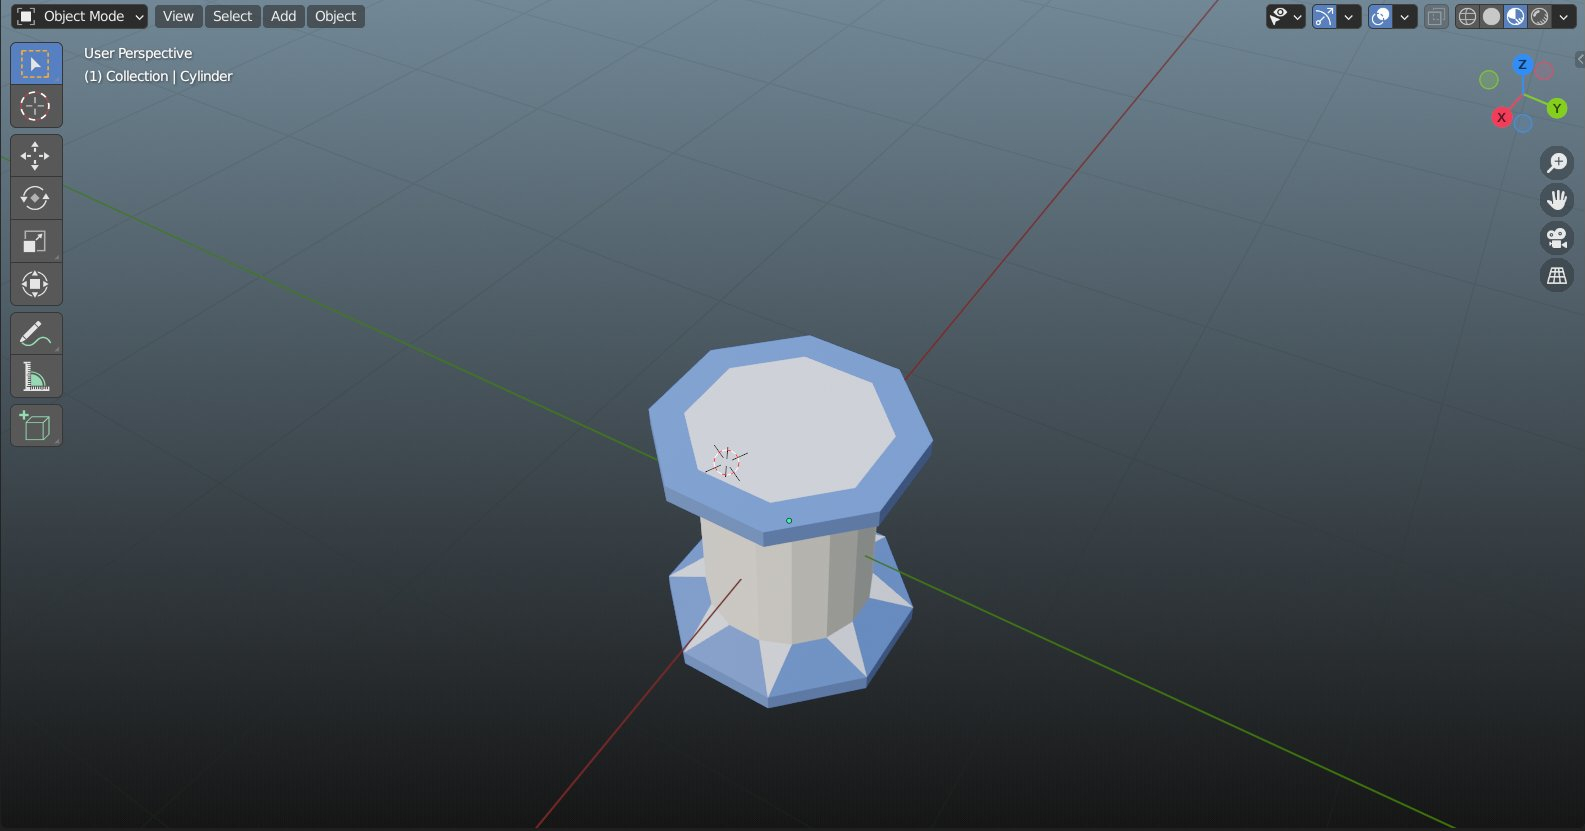 A screenshot of Blender with a simple 3D model I made in the summer